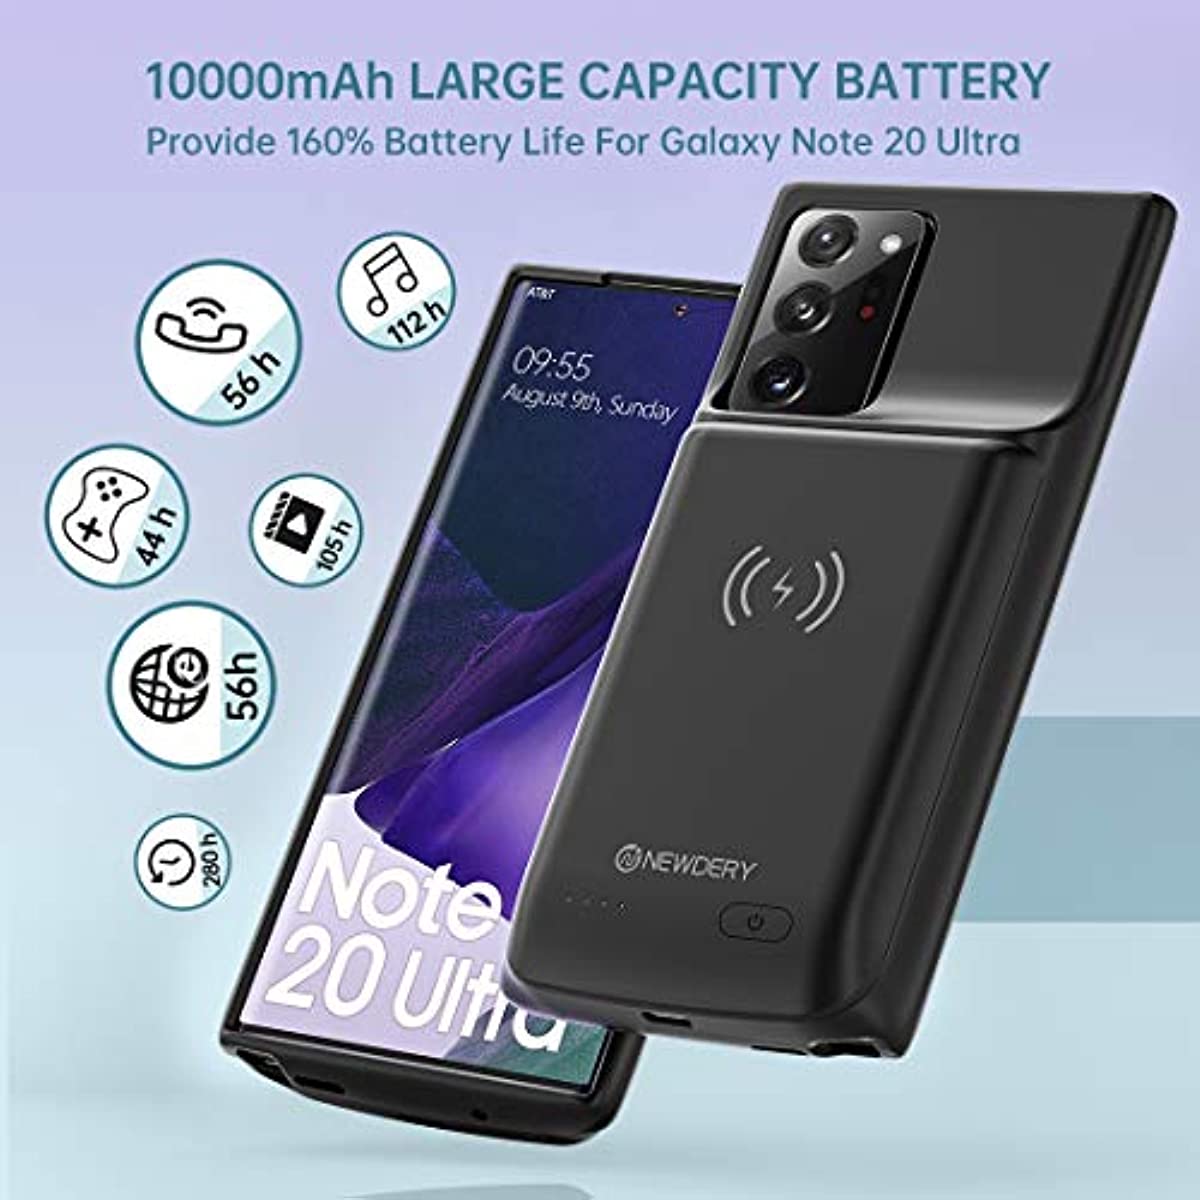 NEWDERY Samsung Galaxy Note 20 Ultra Battery Case 10000mAh, Fast Charging & Qi Wireless & Android Auto Supported, Extended Backup Charger Case for Galaxy Note 20 Ultra 5G (6.9") Black